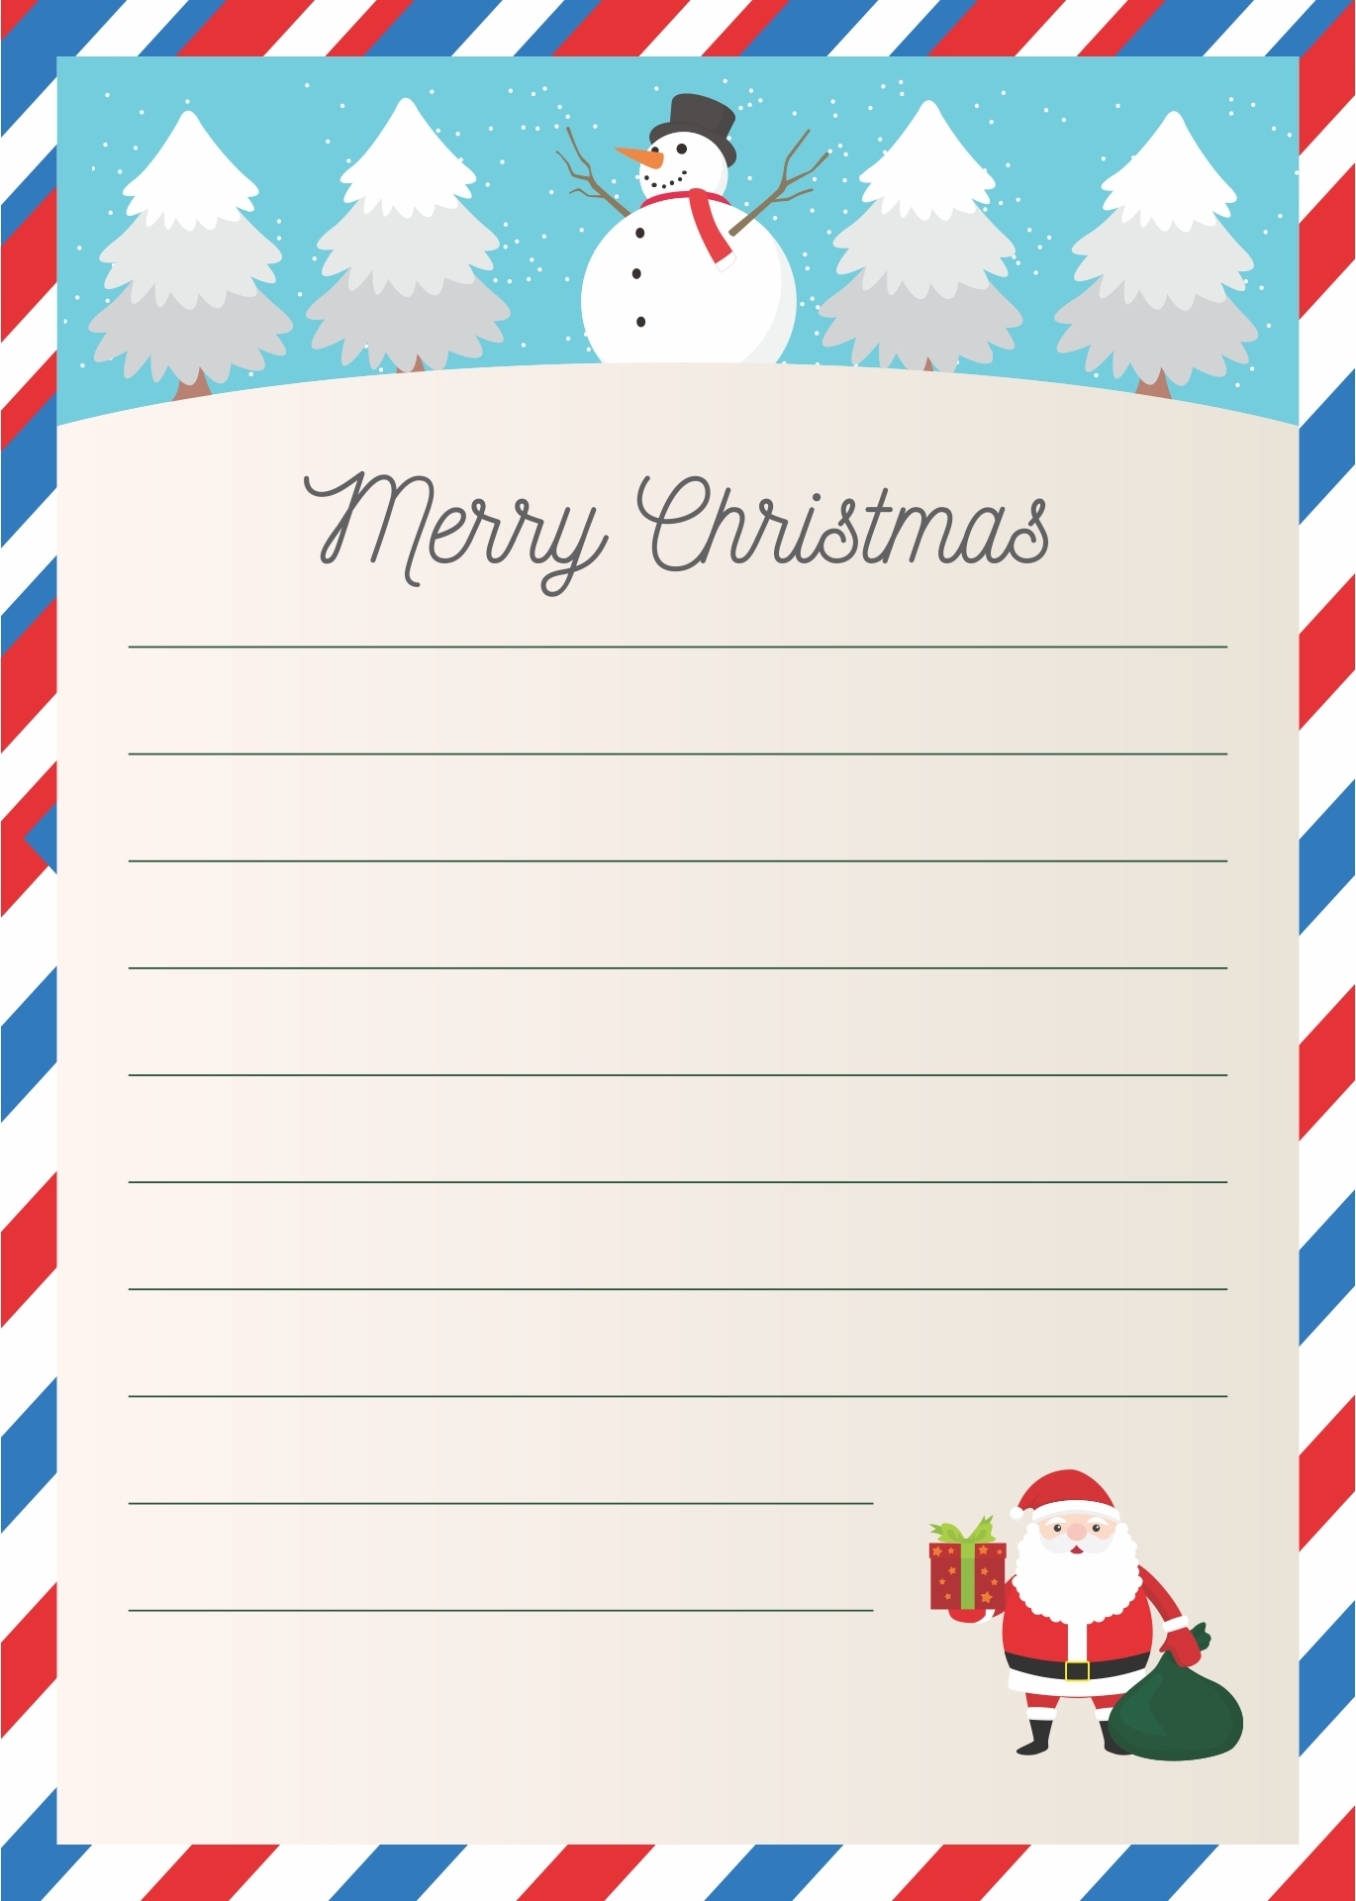 Christmas Letter Template Word - Aletters.one With Regard To Christmas Letter Templates Microsoft Word